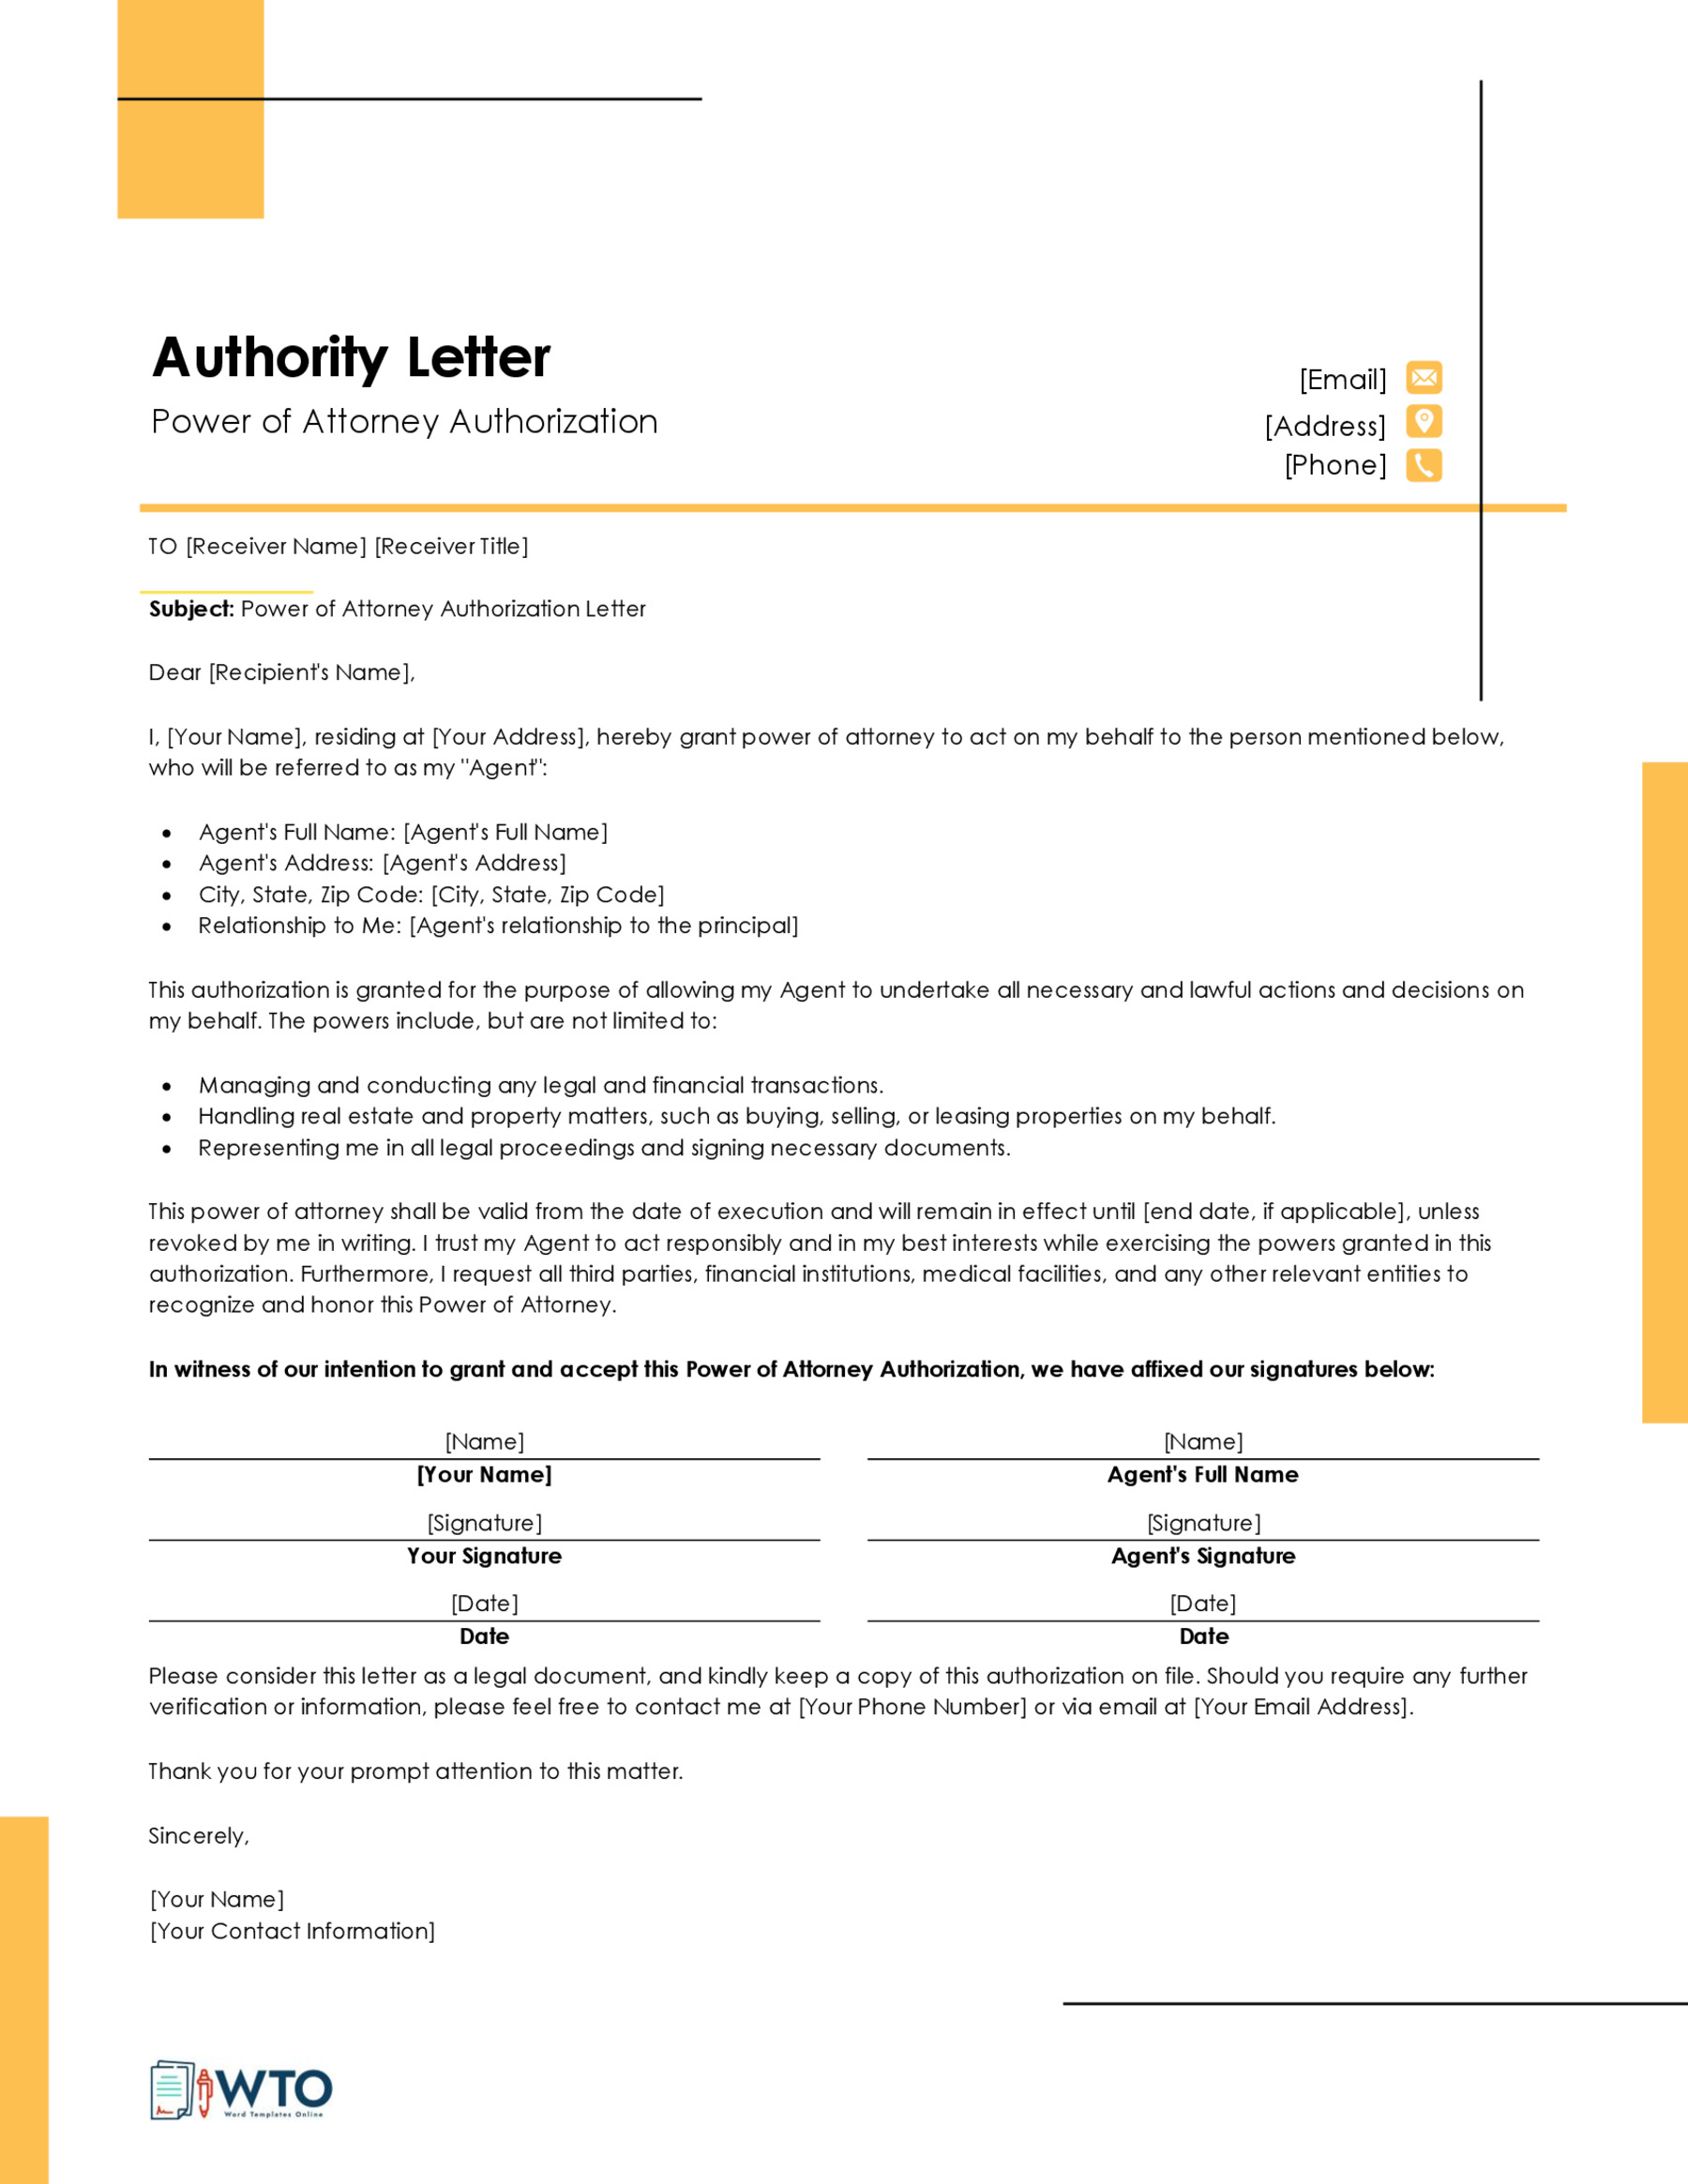 Free Power of Attorney Authorization Letter Template 01 for Word